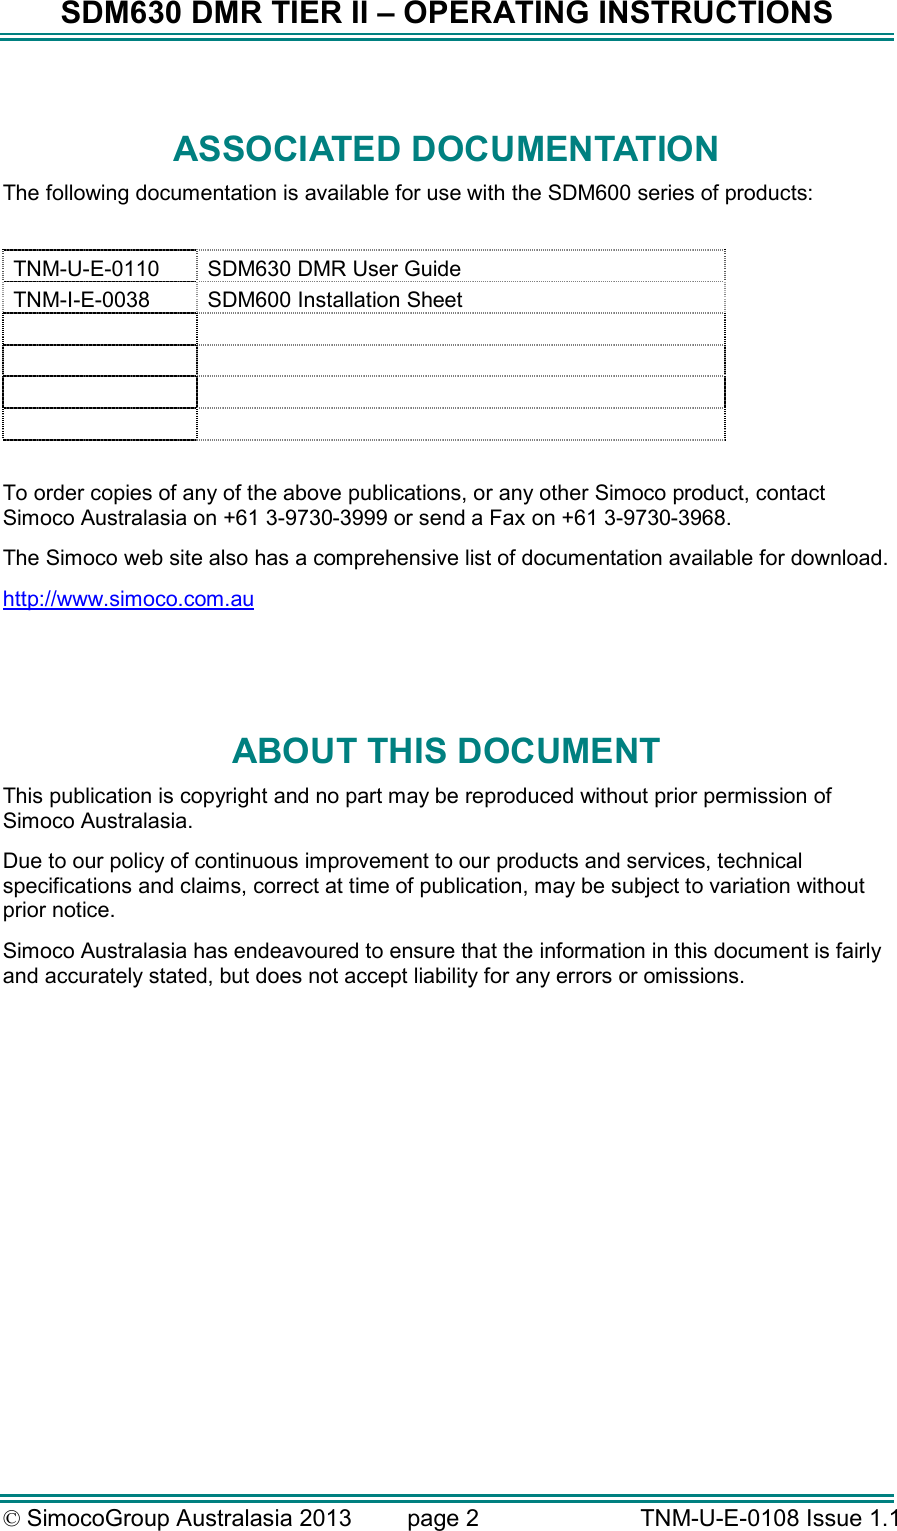 SDM630 DMR TIER II – OPERATING INSTRUCTIONS © SimocoGroup Australasia 2013   page 2   TNM-U-E-0108 Issue 1.1  ASSOCIATED DOCUMENTATION The following documentation is available for use with the SDM600 series of products:  TNM-U-E-0110  SDM630 DMR User Guide TNM-I-E-0038  SDM600 Installation Sheet              To order copies of any of the above publications, or any other Simoco product, contact Simoco Australasia on +61 3-9730-3999 or send a Fax on +61 3-9730-3968. The Simoco web site also has a comprehensive list of documentation available for download. http://www.simoco.com.au   ABOUT THIS DOCUMENT This publication is copyright and no part may be reproduced without prior permission of Simoco Australasia. Due to our policy of continuous improvement to our products and services, technical specifications and claims, correct at time of publication, may be subject to variation without prior notice.   Simoco Australasia has endeavoured to ensure that the information in this document is fairly and accurately stated, but does not accept liability for any errors or omissions.    